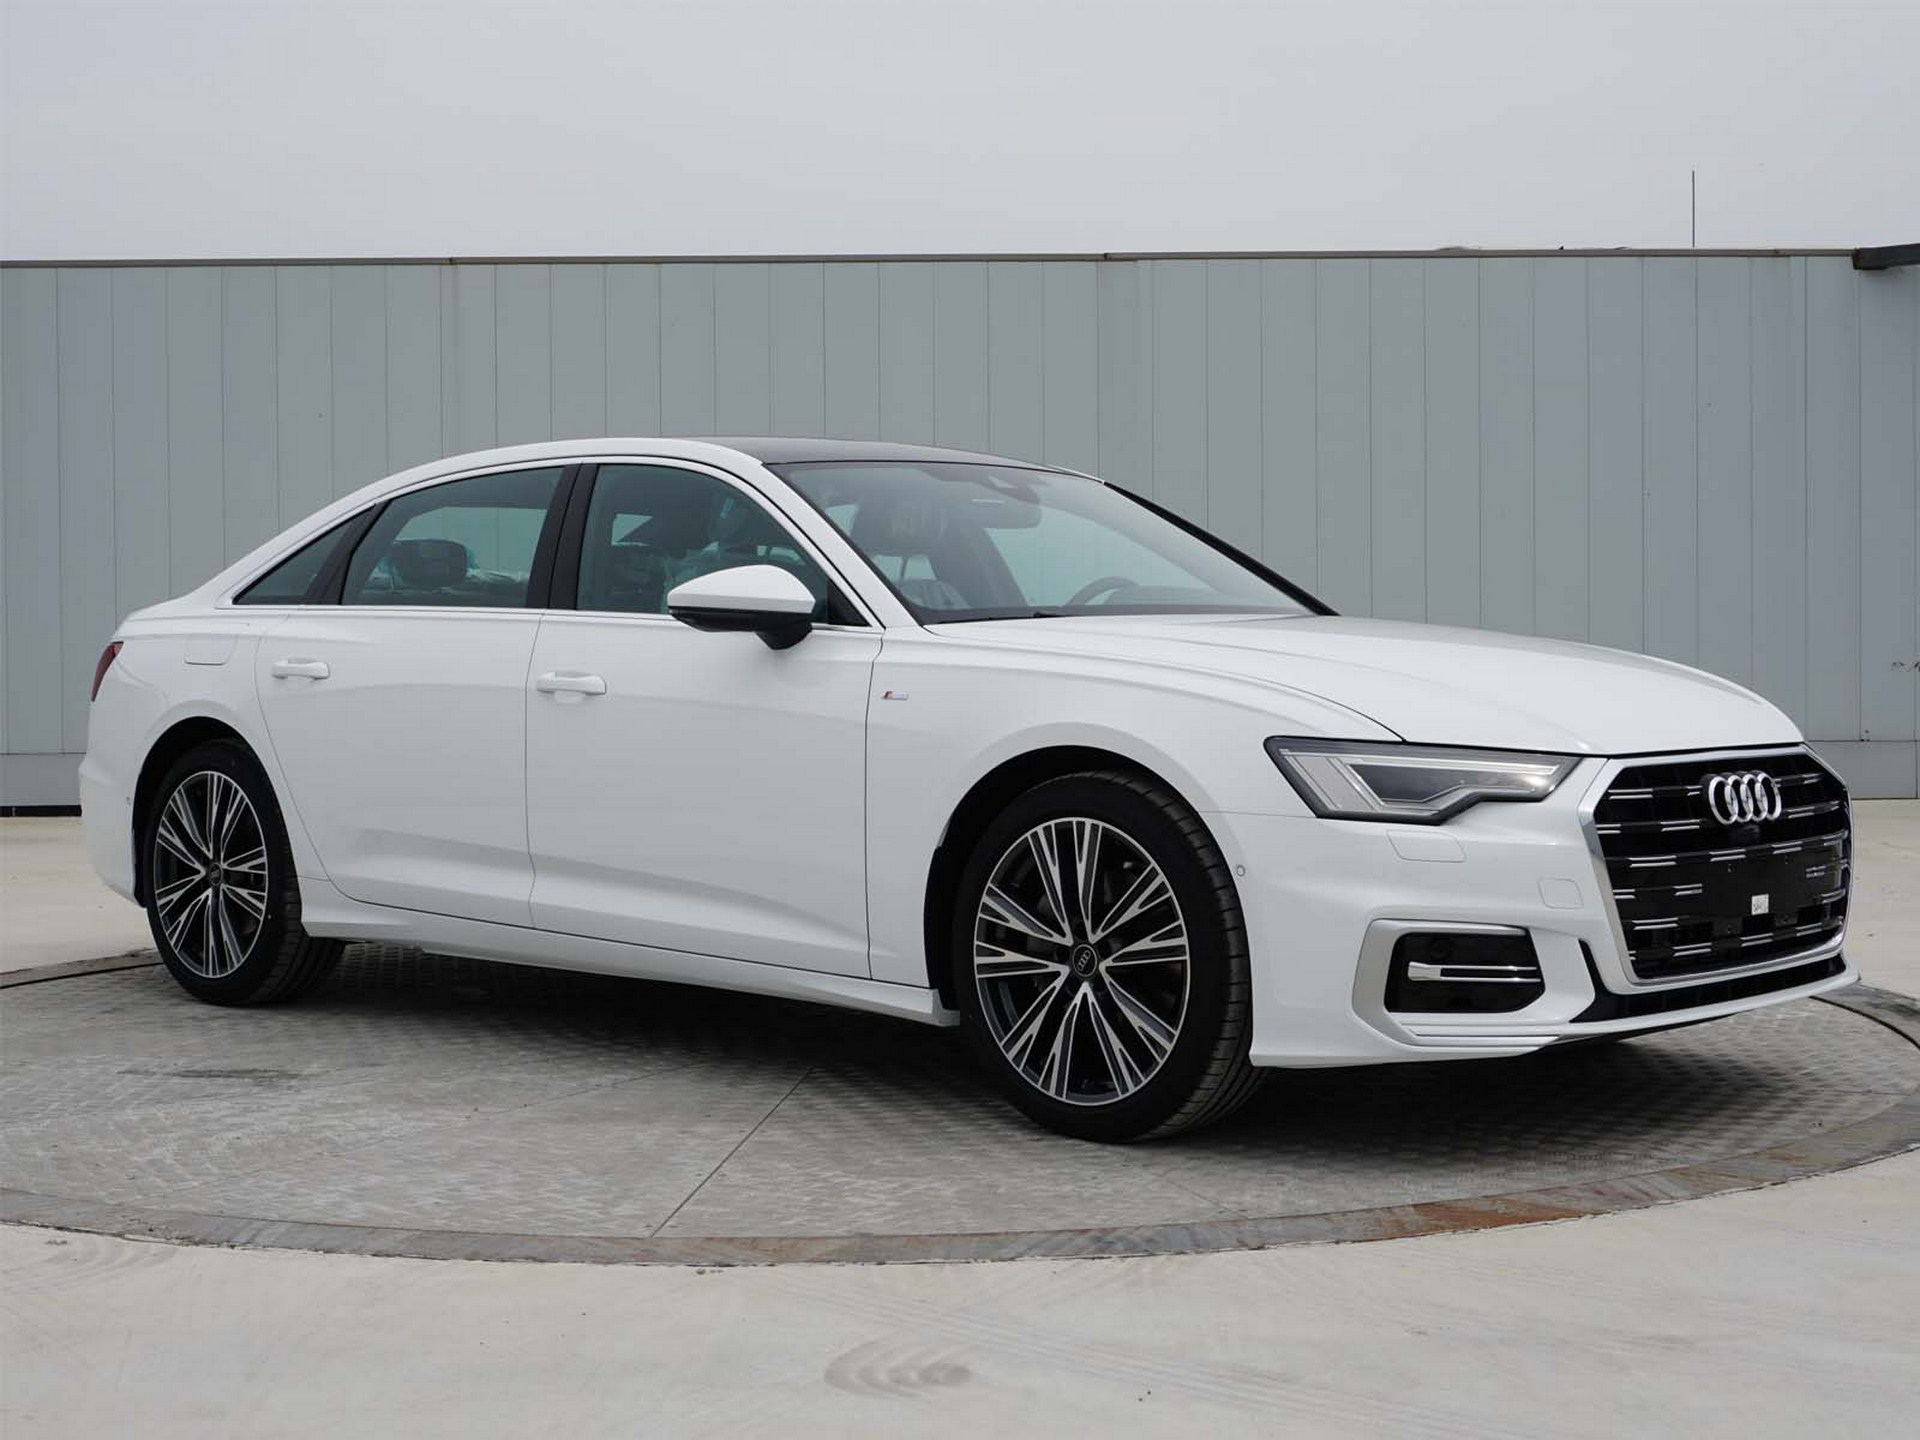 annuleren Moet Voorbijgaand 2023 Audi A6 Facelift Possibly Previewed By China's Updated A6 L | Carscoops